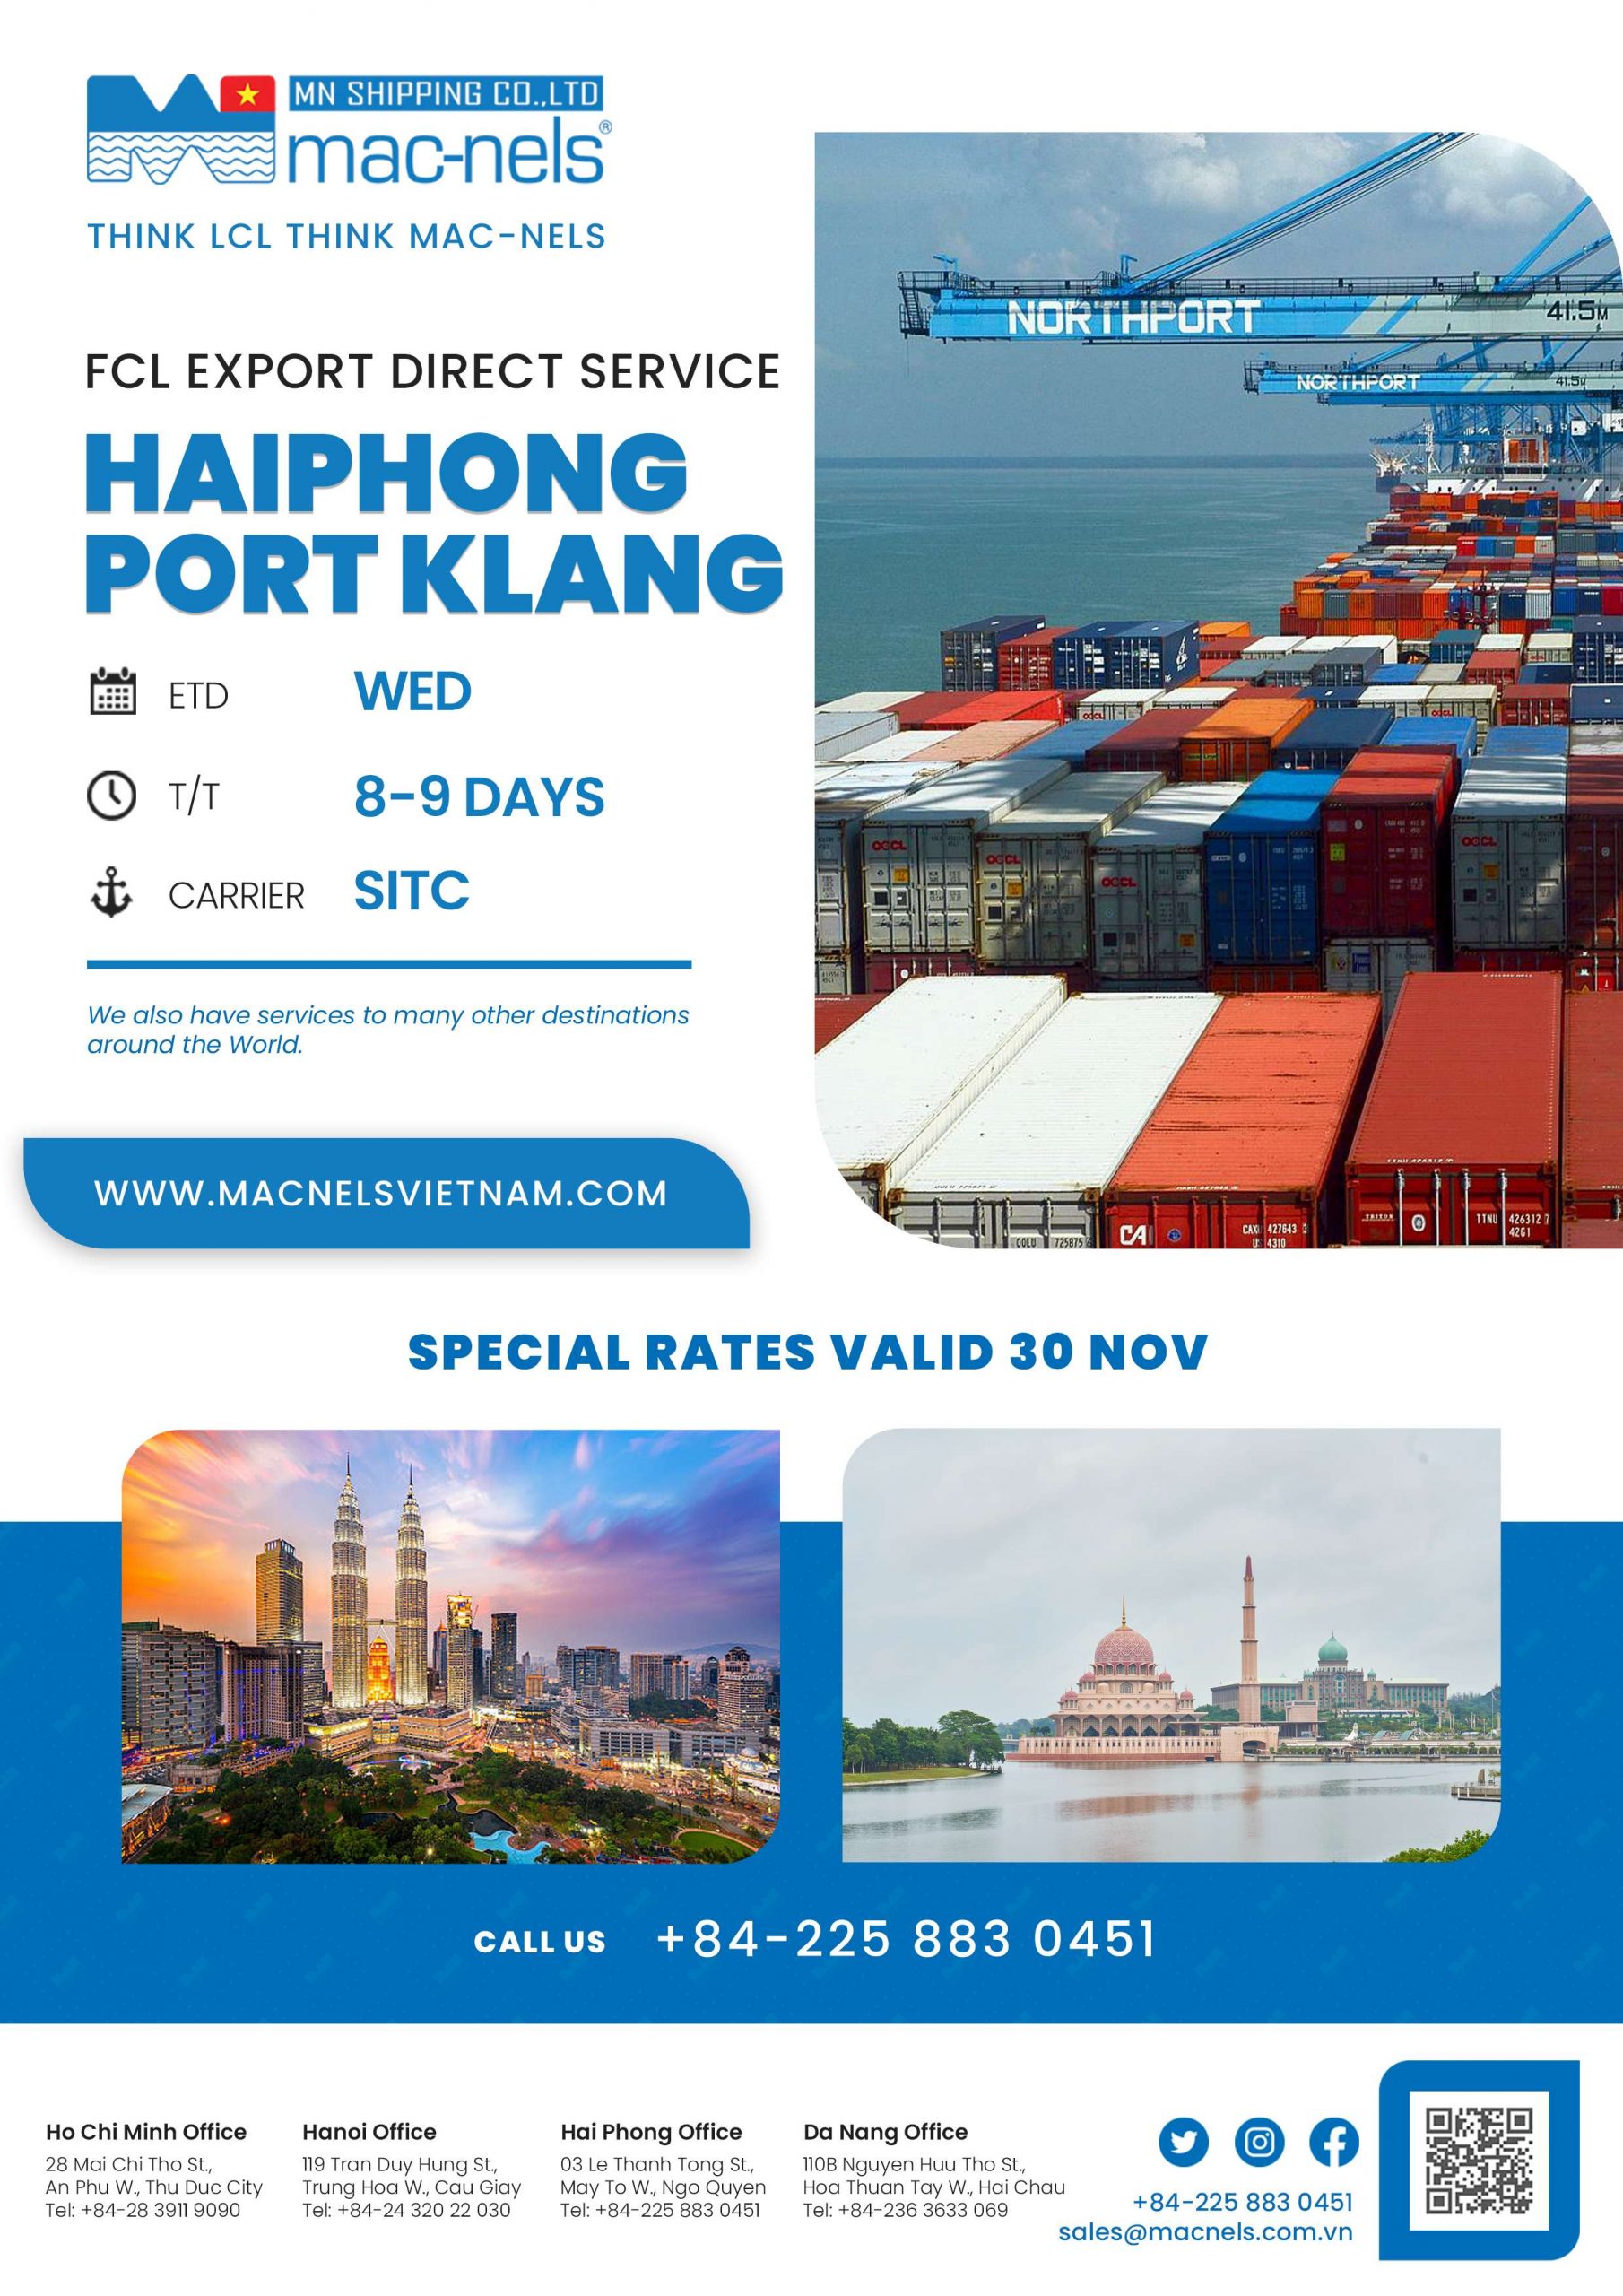 FCL Export Direct service from Haiphong to Port Klang